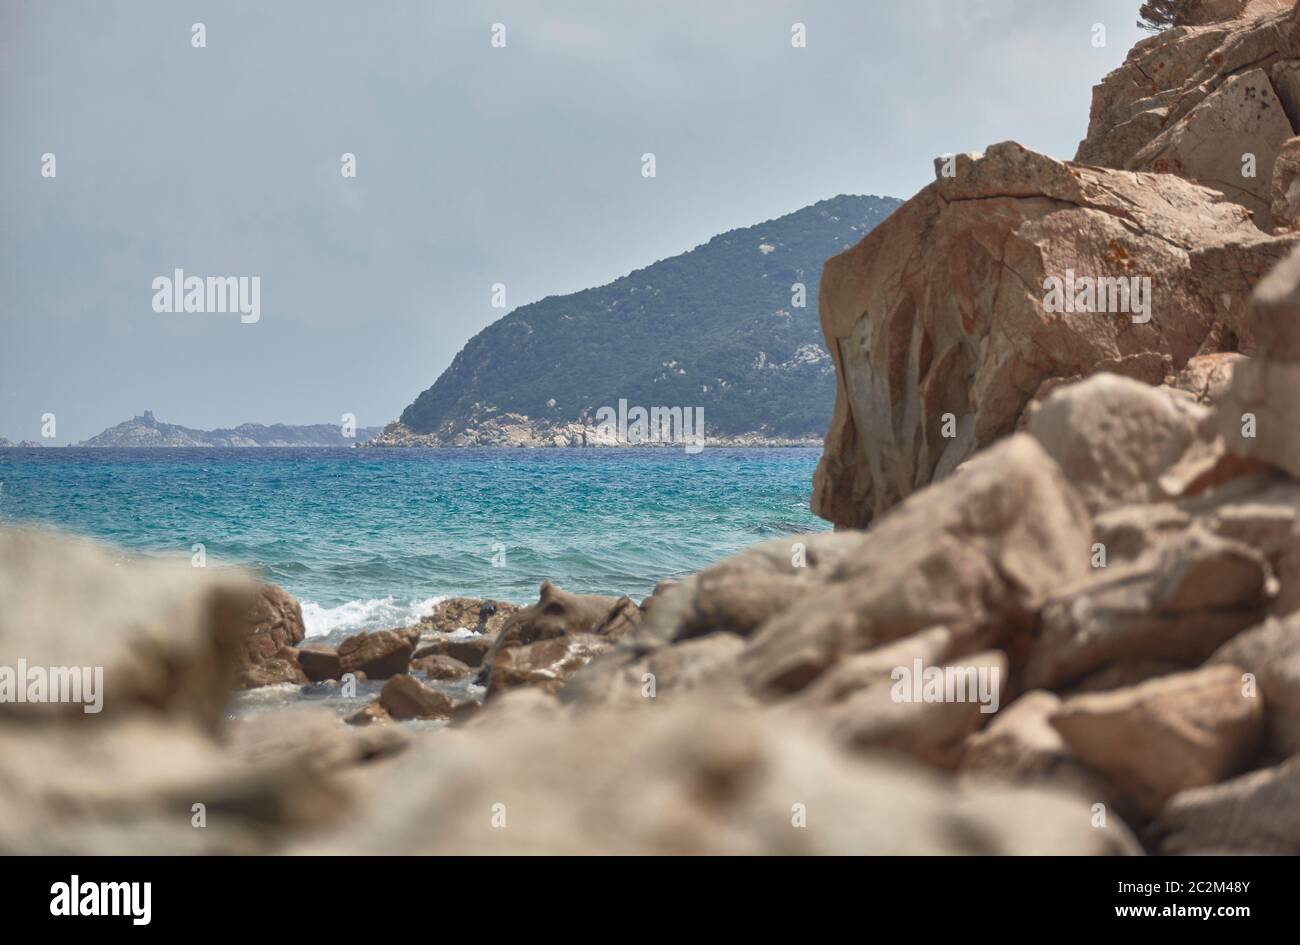 Mountain overlooking the sea filtered by some blurred rocks nearby. Stock Photo